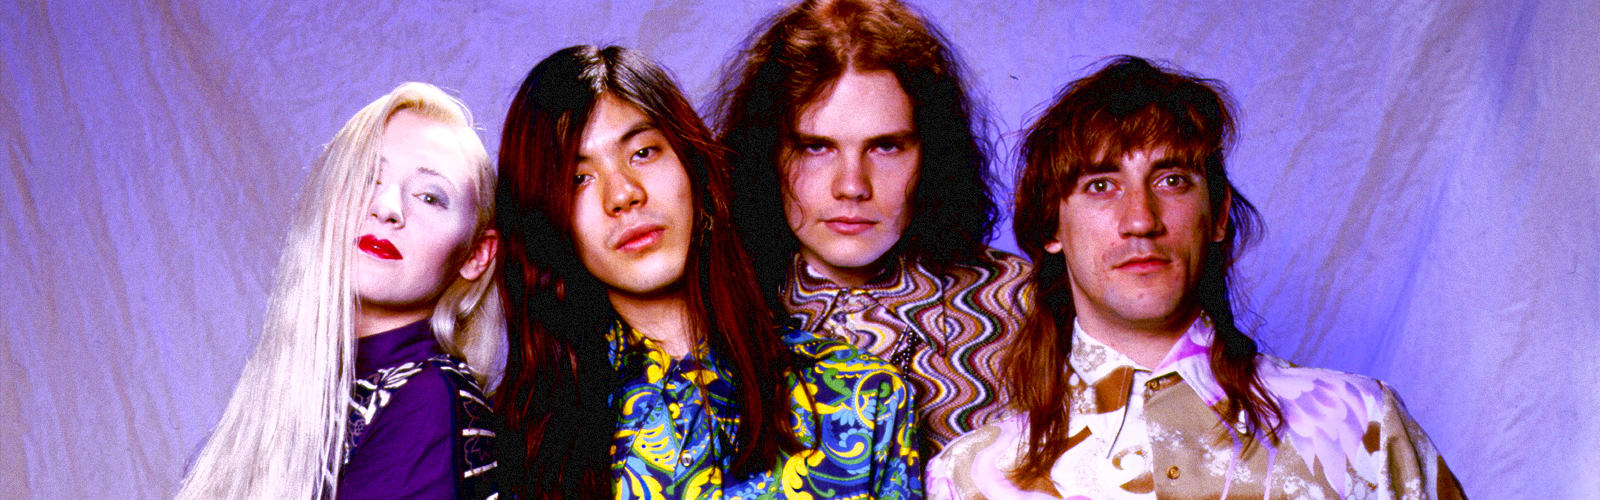 The Best Smashing Pumpkins Songs Ranked